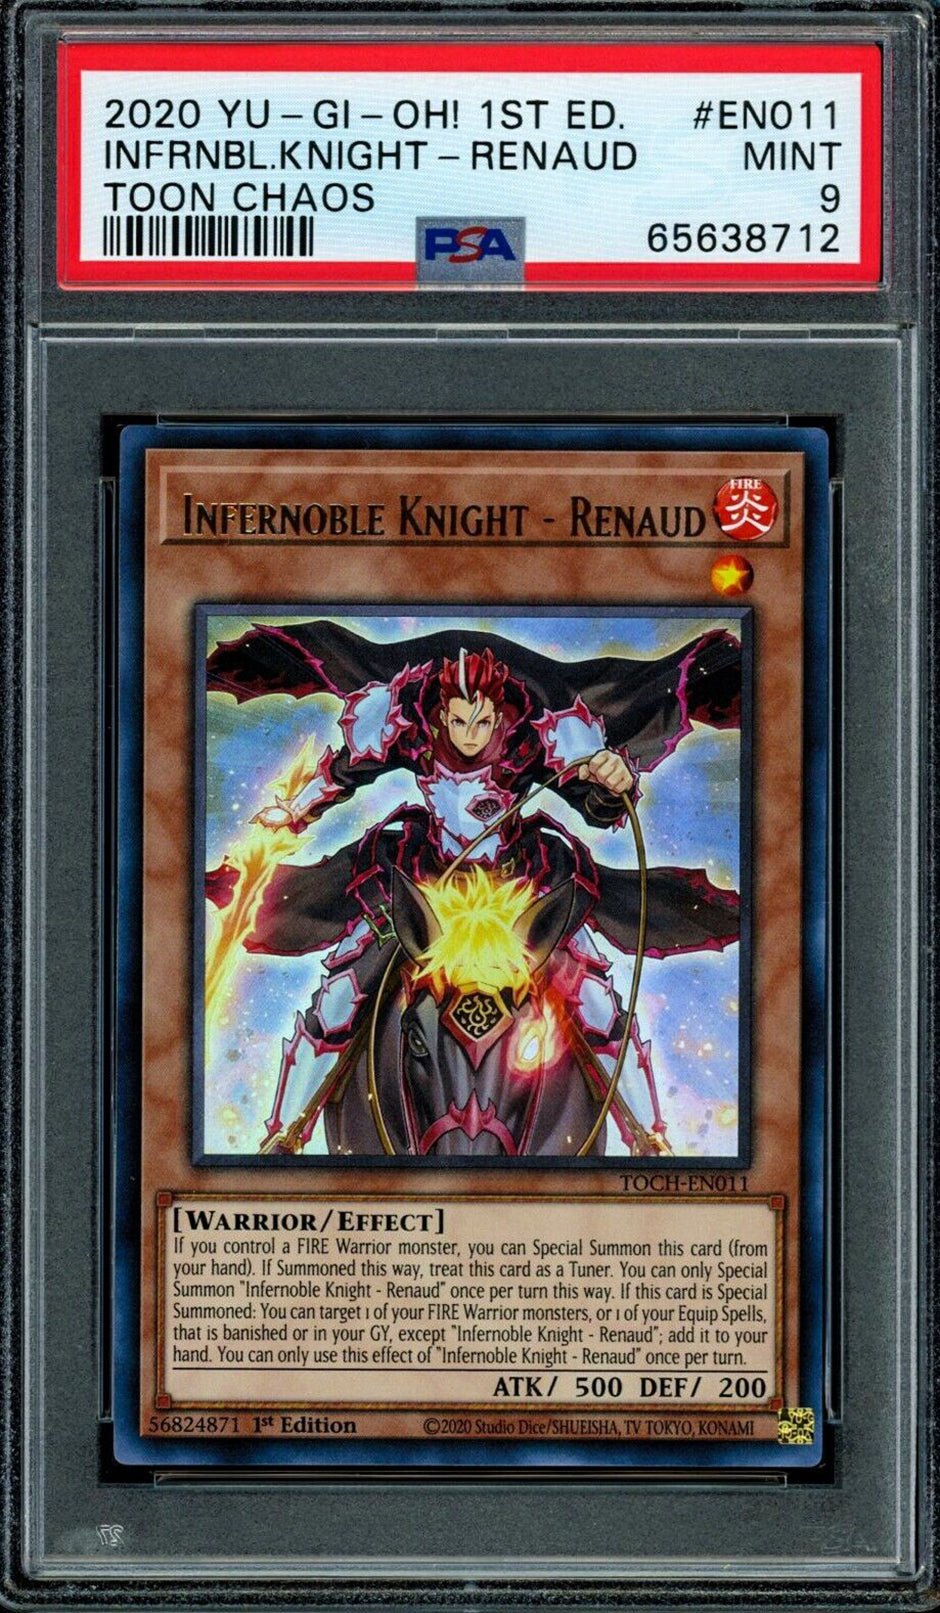 INFERNOBLE KNIGHT - RENAUD TOCH-EN011 Ultra Rare PSA 9 2020 Toon Chaos 1st Edition Yu-Gi-Oh Base Graded Cards - Hobby Gems